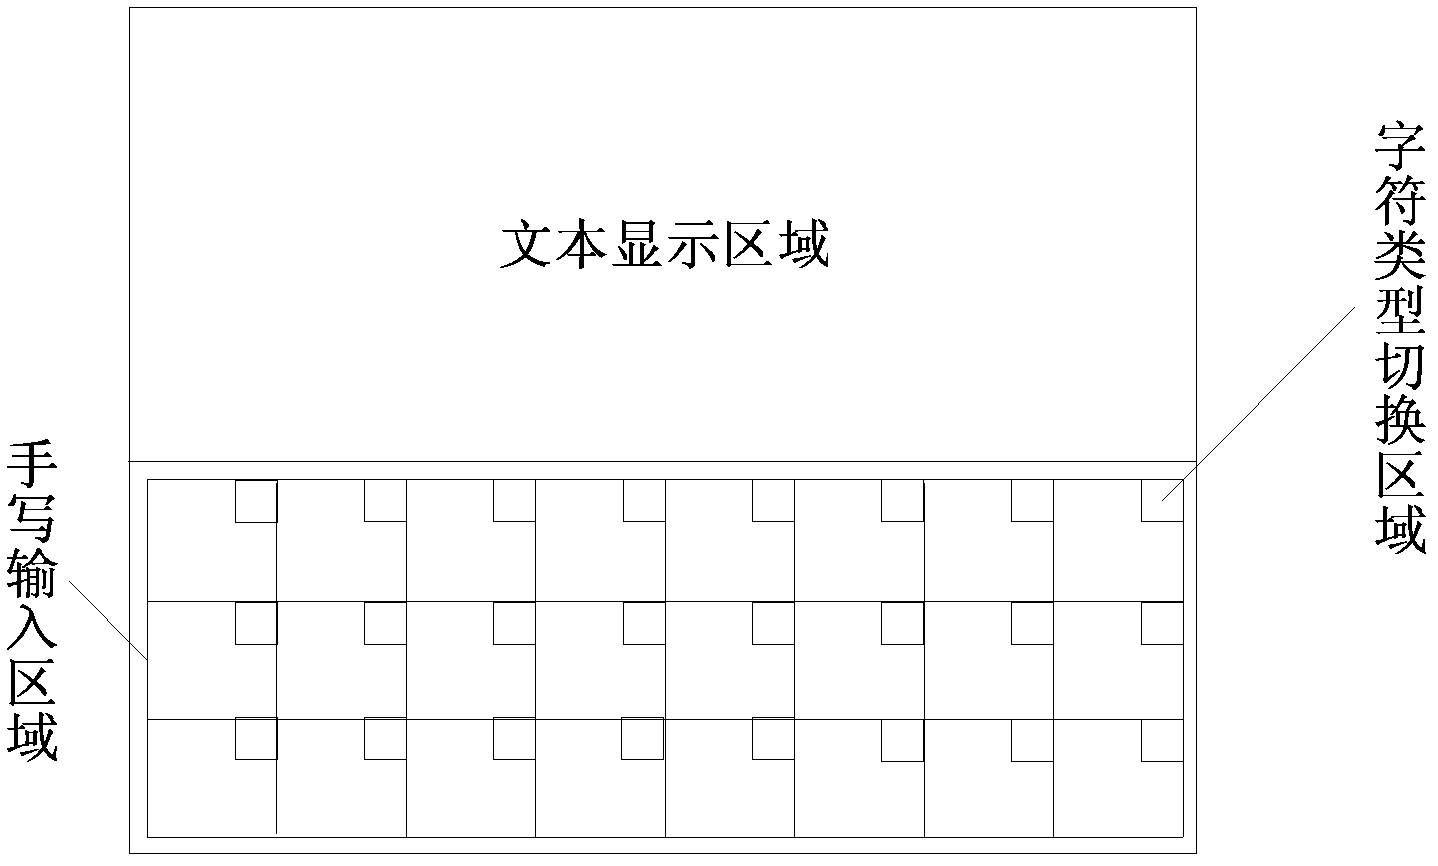 Character input method and device on basis of touch screen system